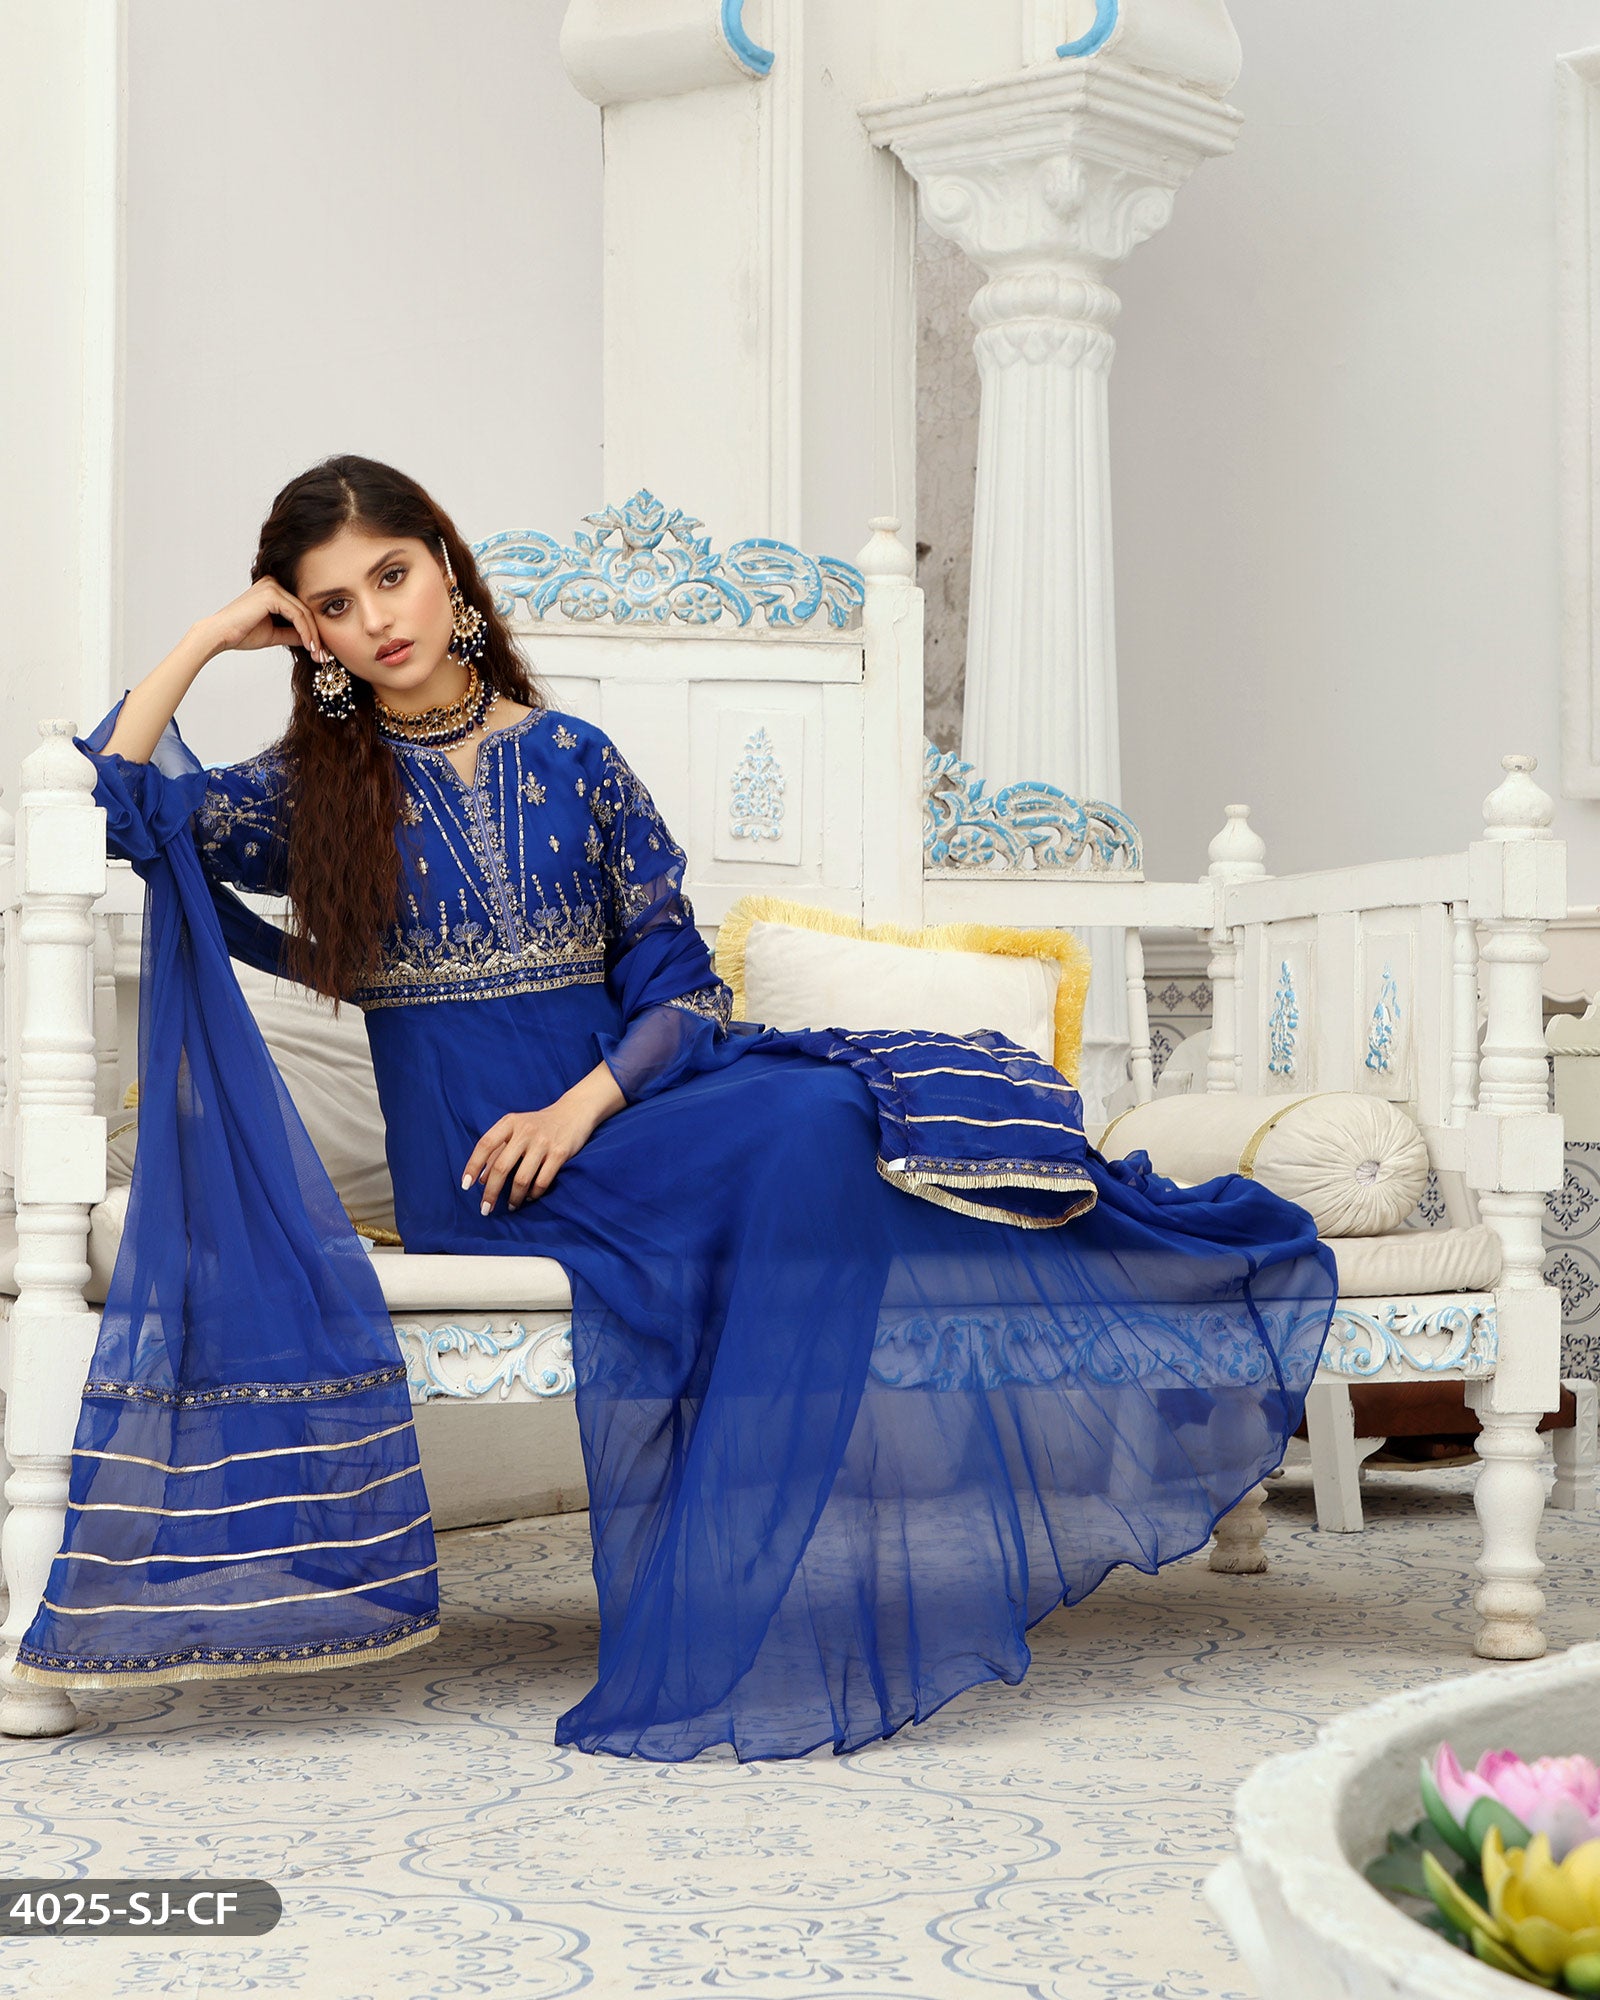 Formal 3PC Blue Embroidered Maxi